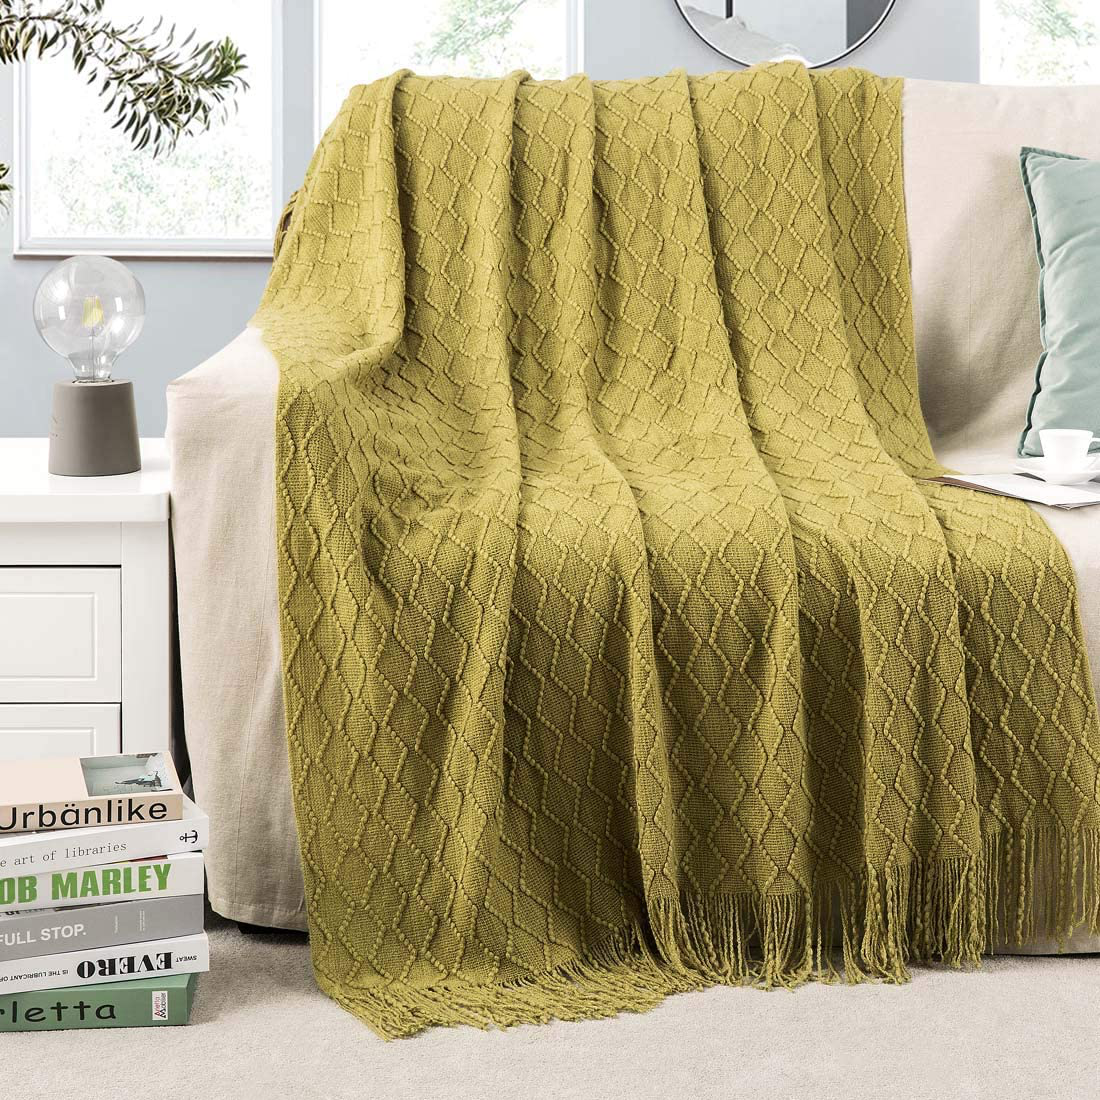 Revdomfly Mustard Yellow Throw Blanket with Fringe Decorative Farmhouse Knitted Throw Blanket for Sofa Couch Bed, 50" x 67", Yellow